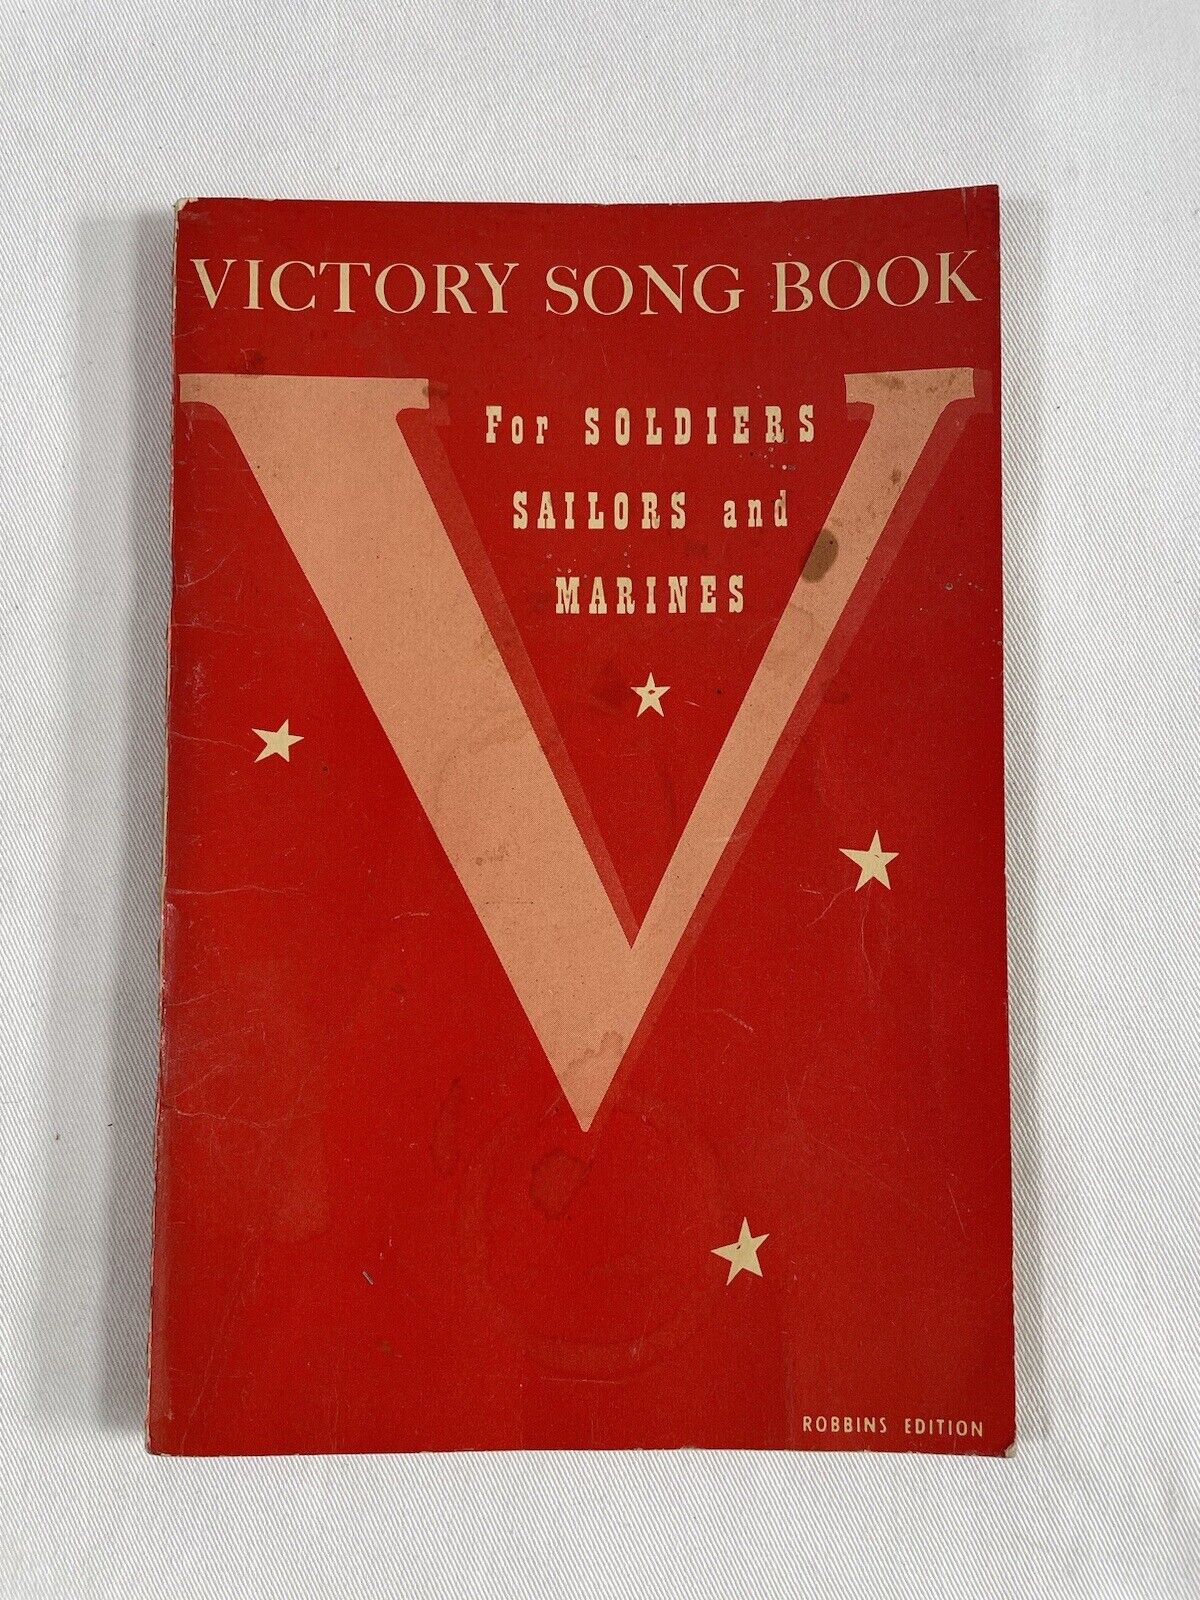 Vintage 1942 Victory Song Book for Soldiers, Sailors & Marines